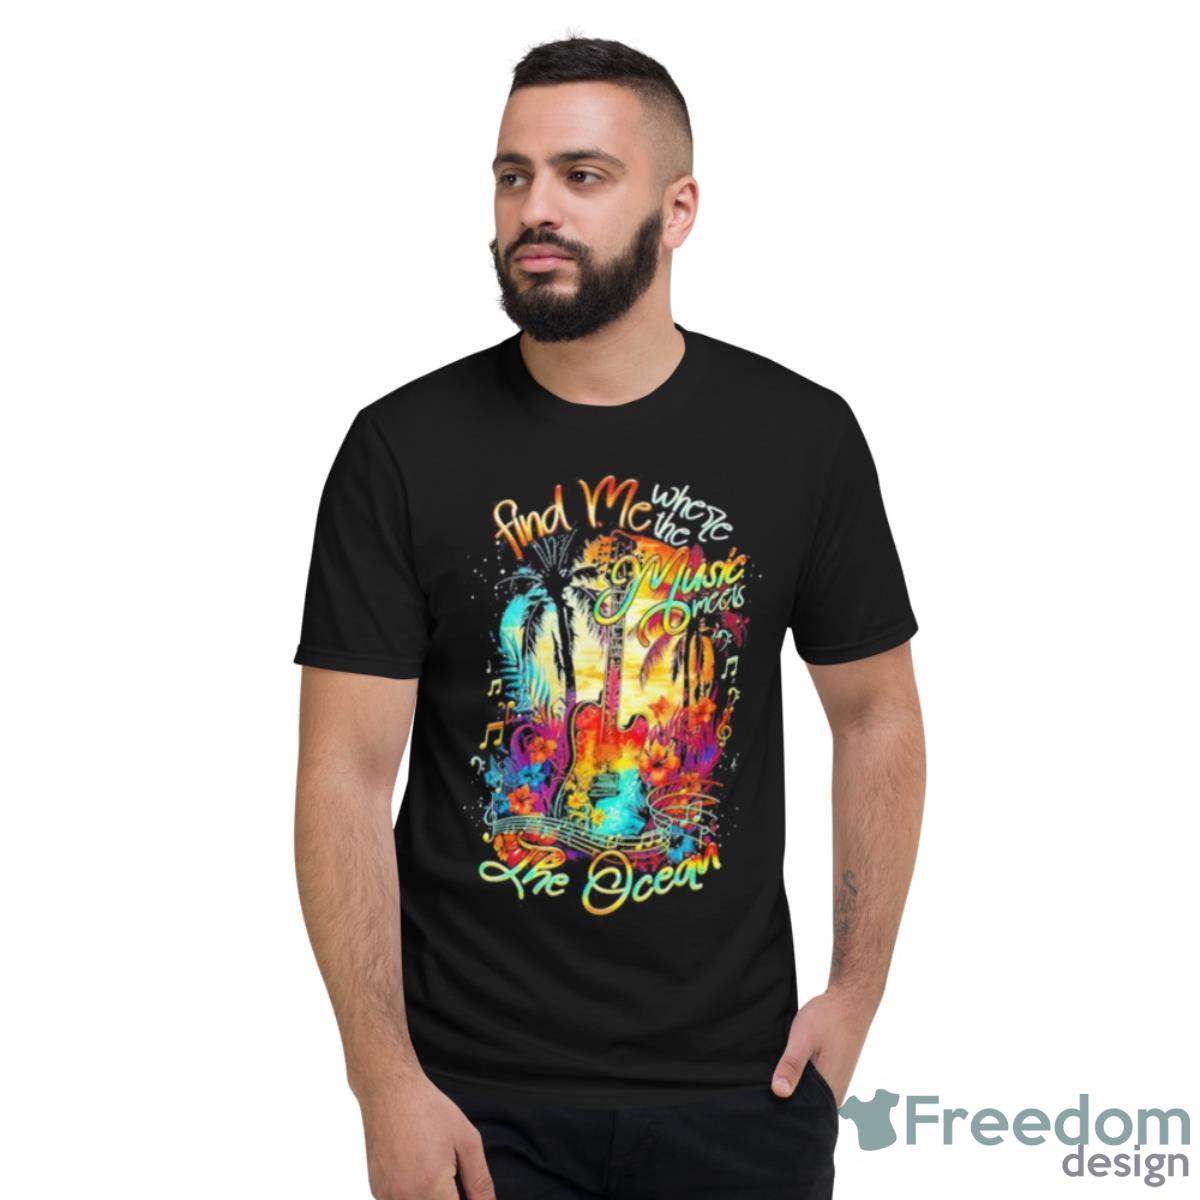 Find Me Where The Music Meets The Ocean Shirt